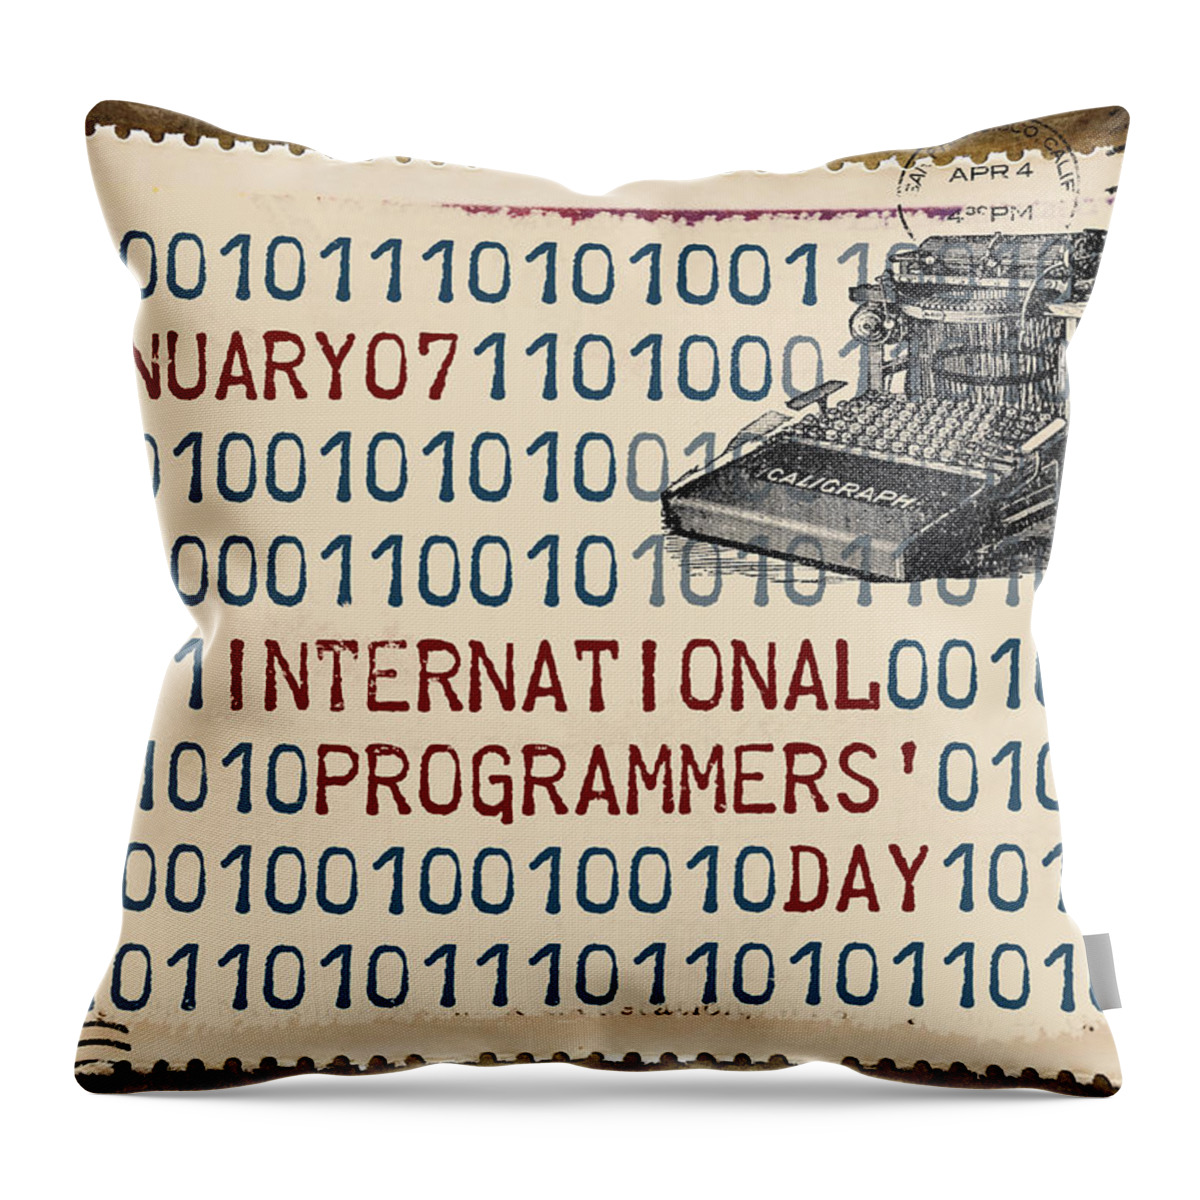 International Programmers' Day Throw Pillow featuring the photograph International Programmers' Day January 7 by Carol Leigh